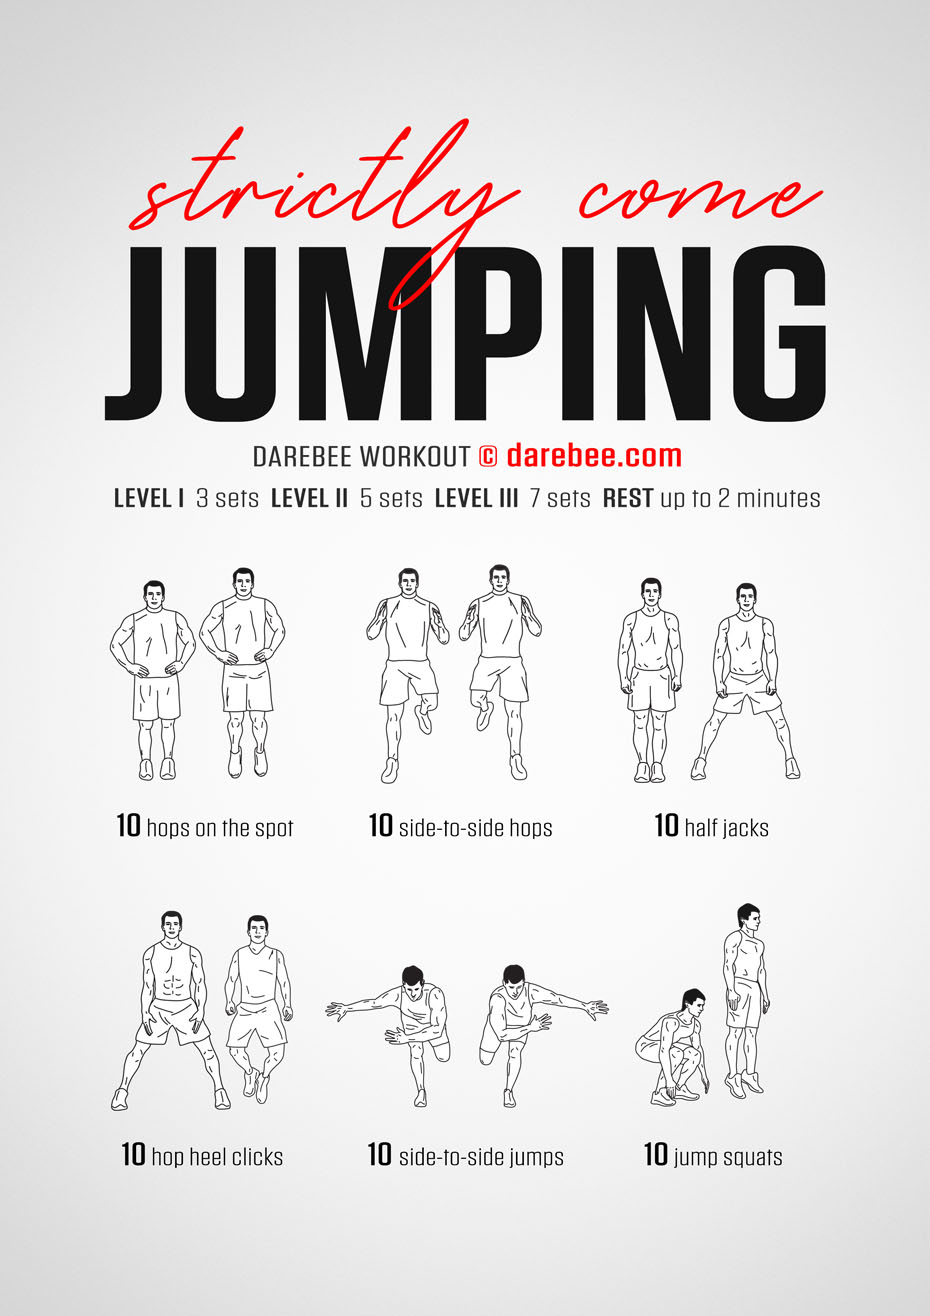 Strictly Come Jumping is DAREBEE home fitness no-equipment cardiovascular and aerobic fitness workout.